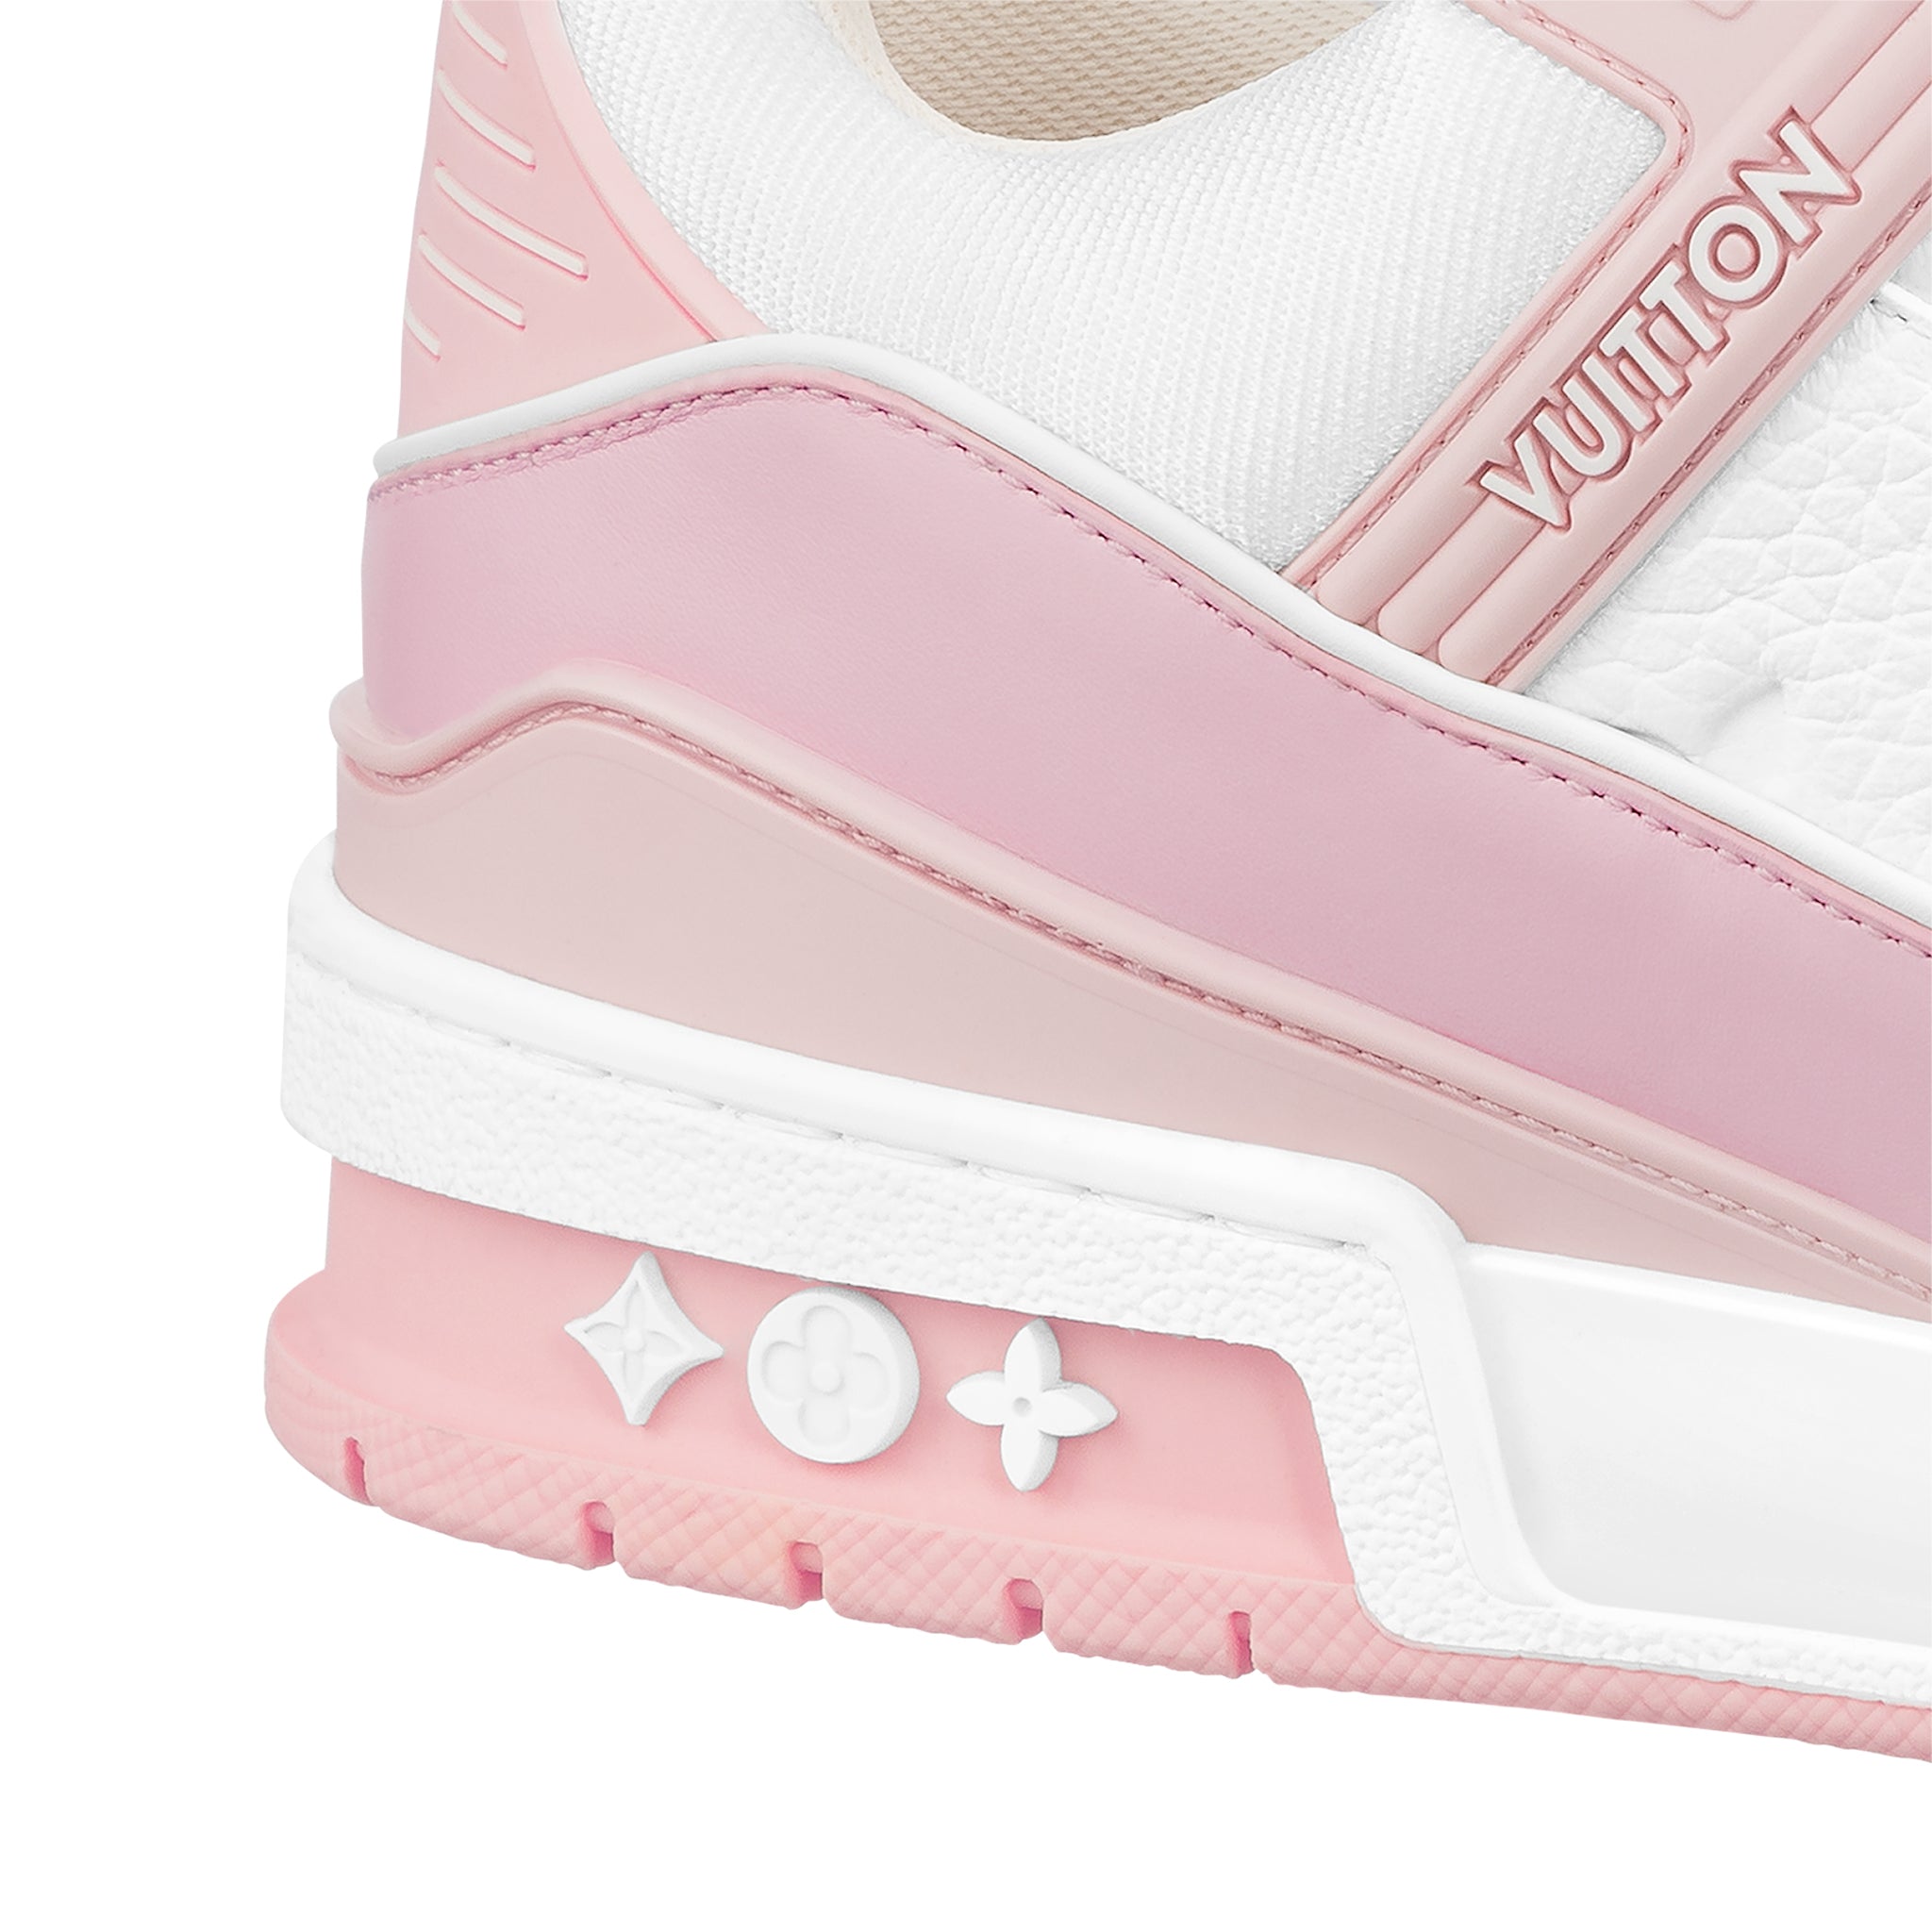 Image of Louis Vuitton LV Trainer Rose Sneaker